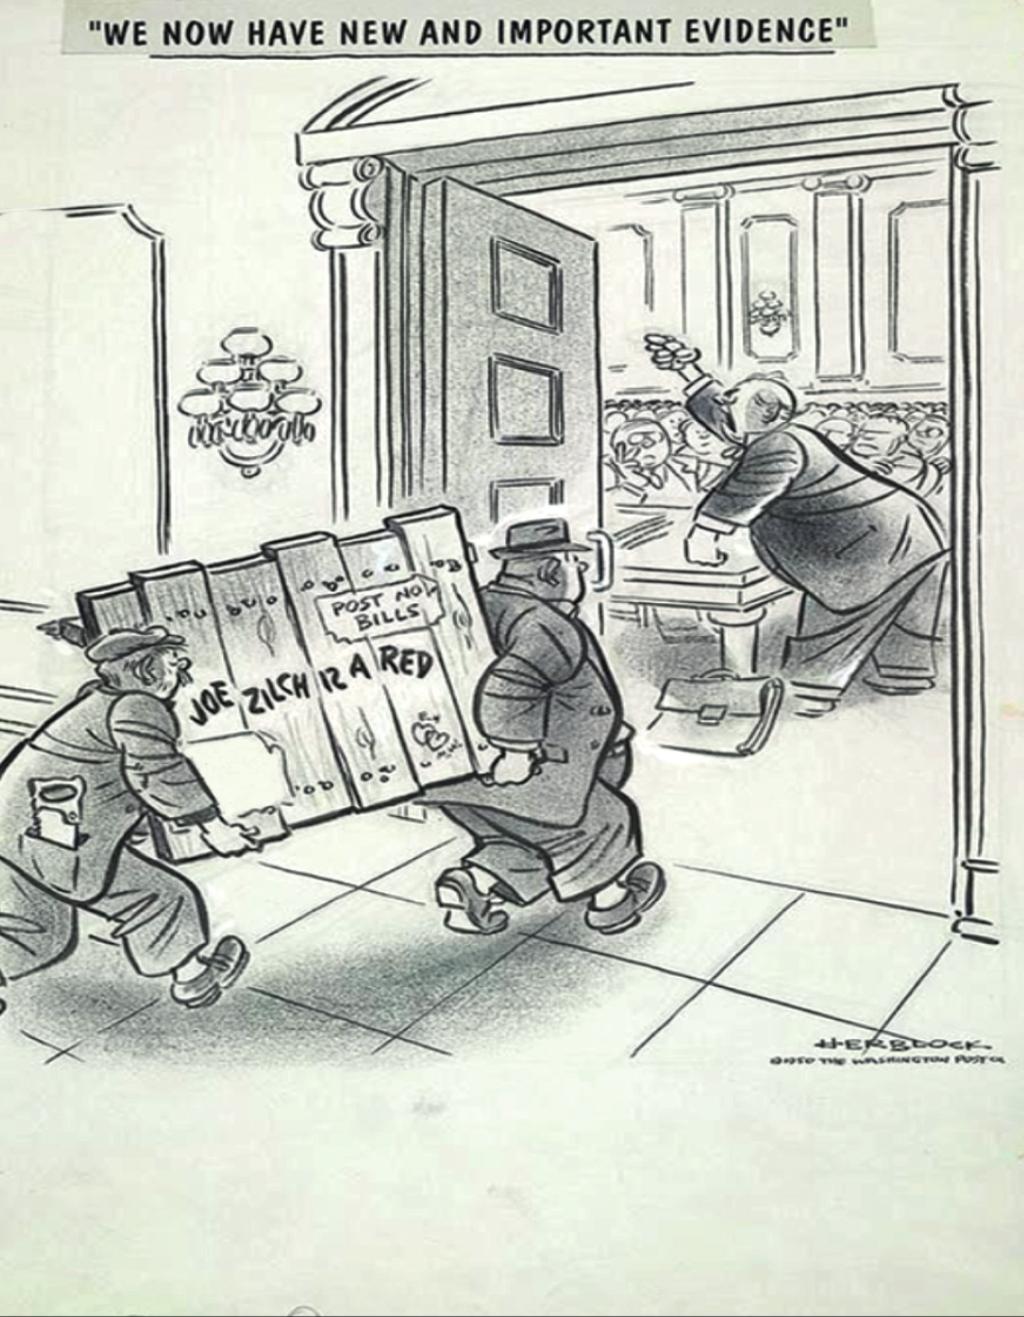 9 SOURCE C An American cartoon published in 1950.